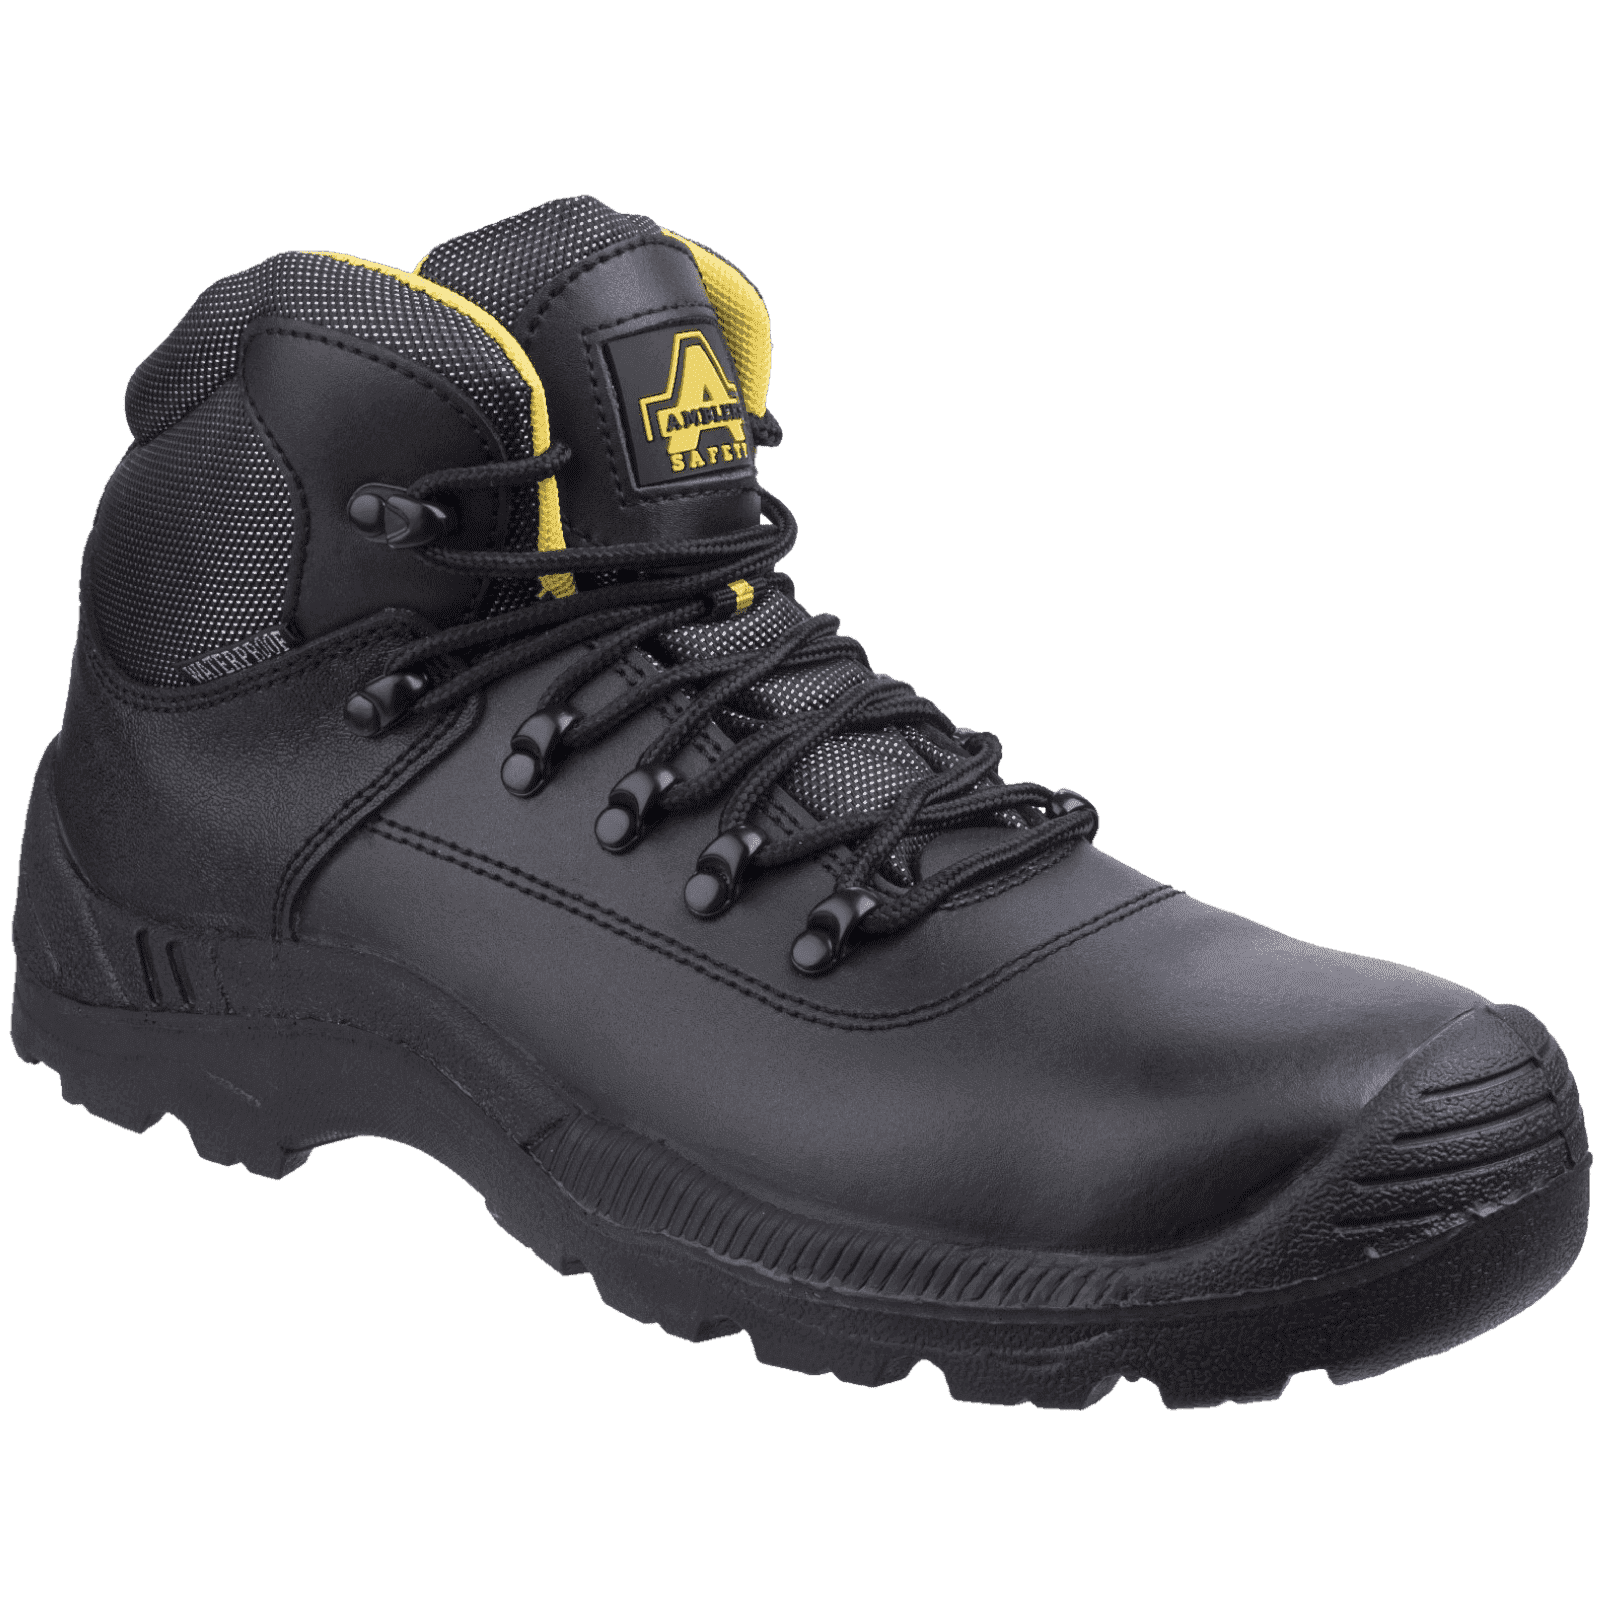 Waterproof Safety Boots FS220 Amblers